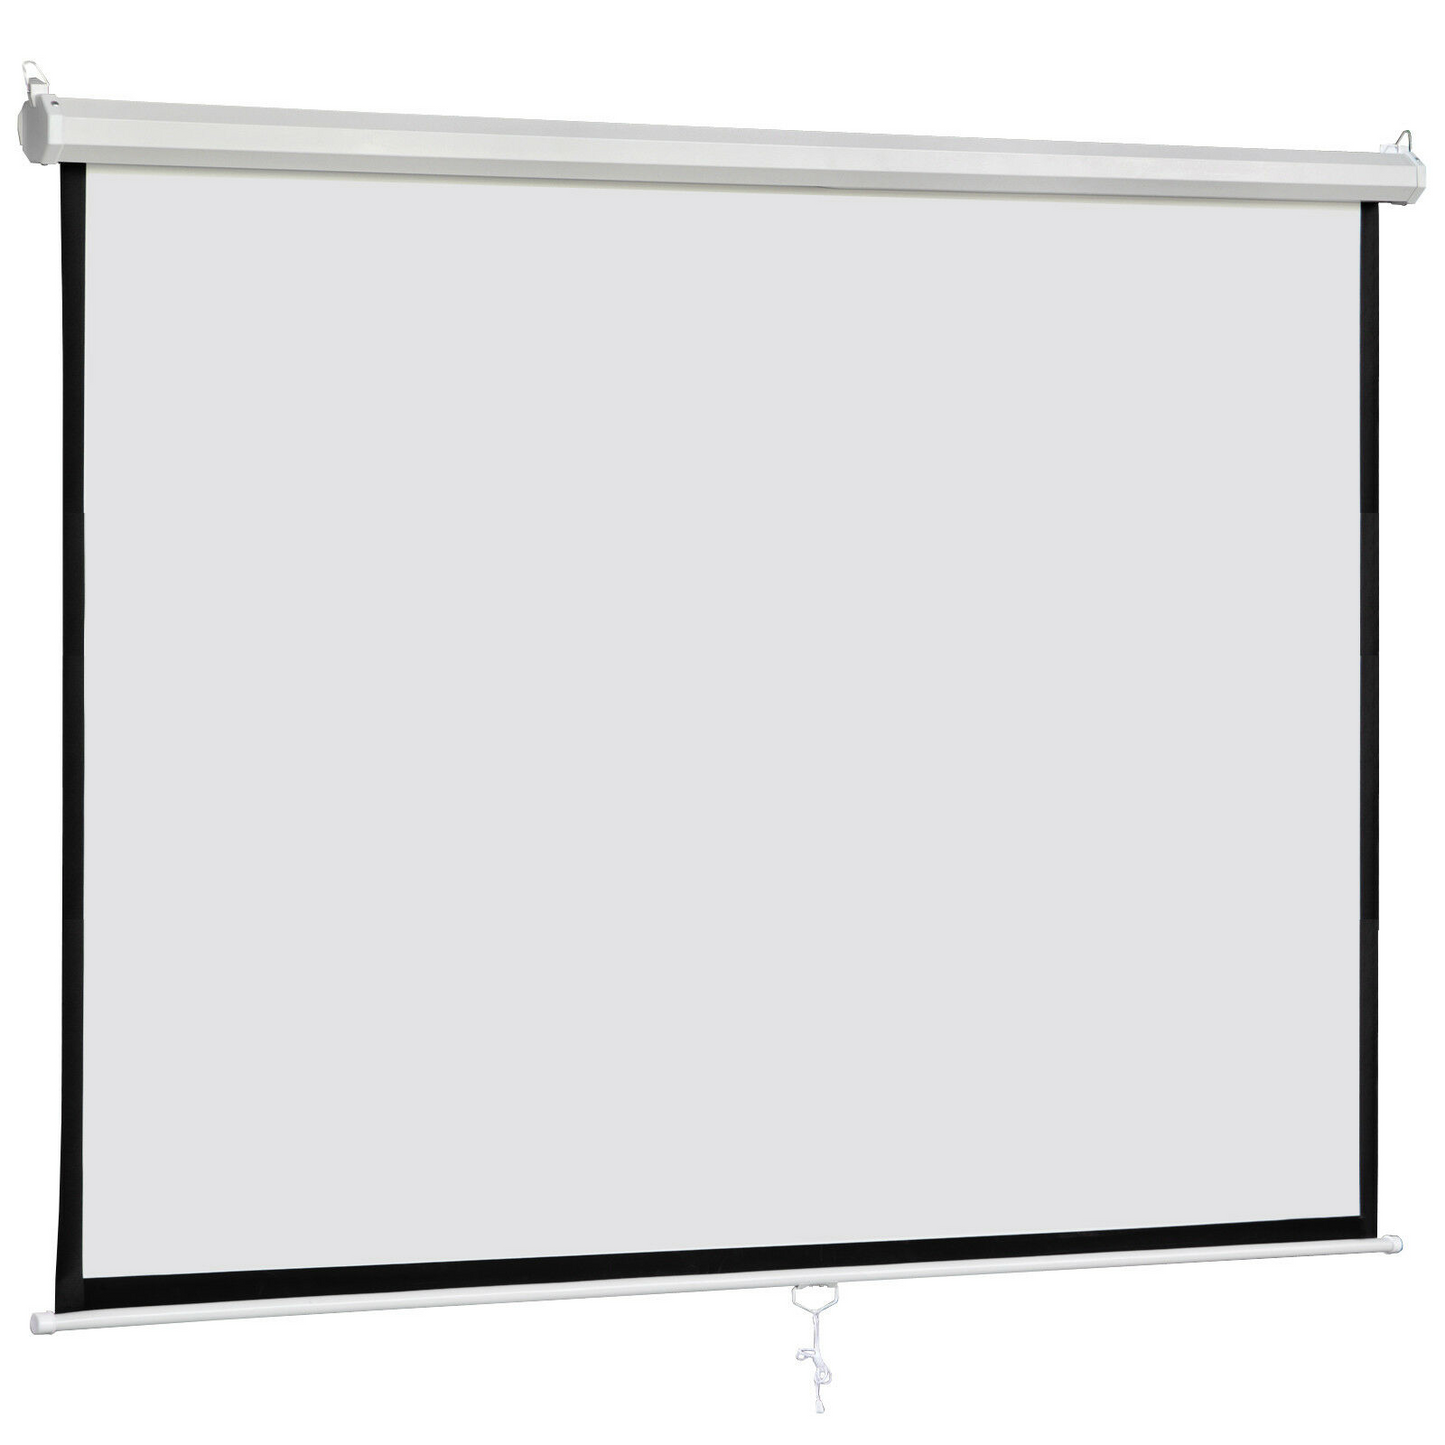 USED 84" X 84" Diagonal Dimension Pull Down Projection Screen HD Movie Theater